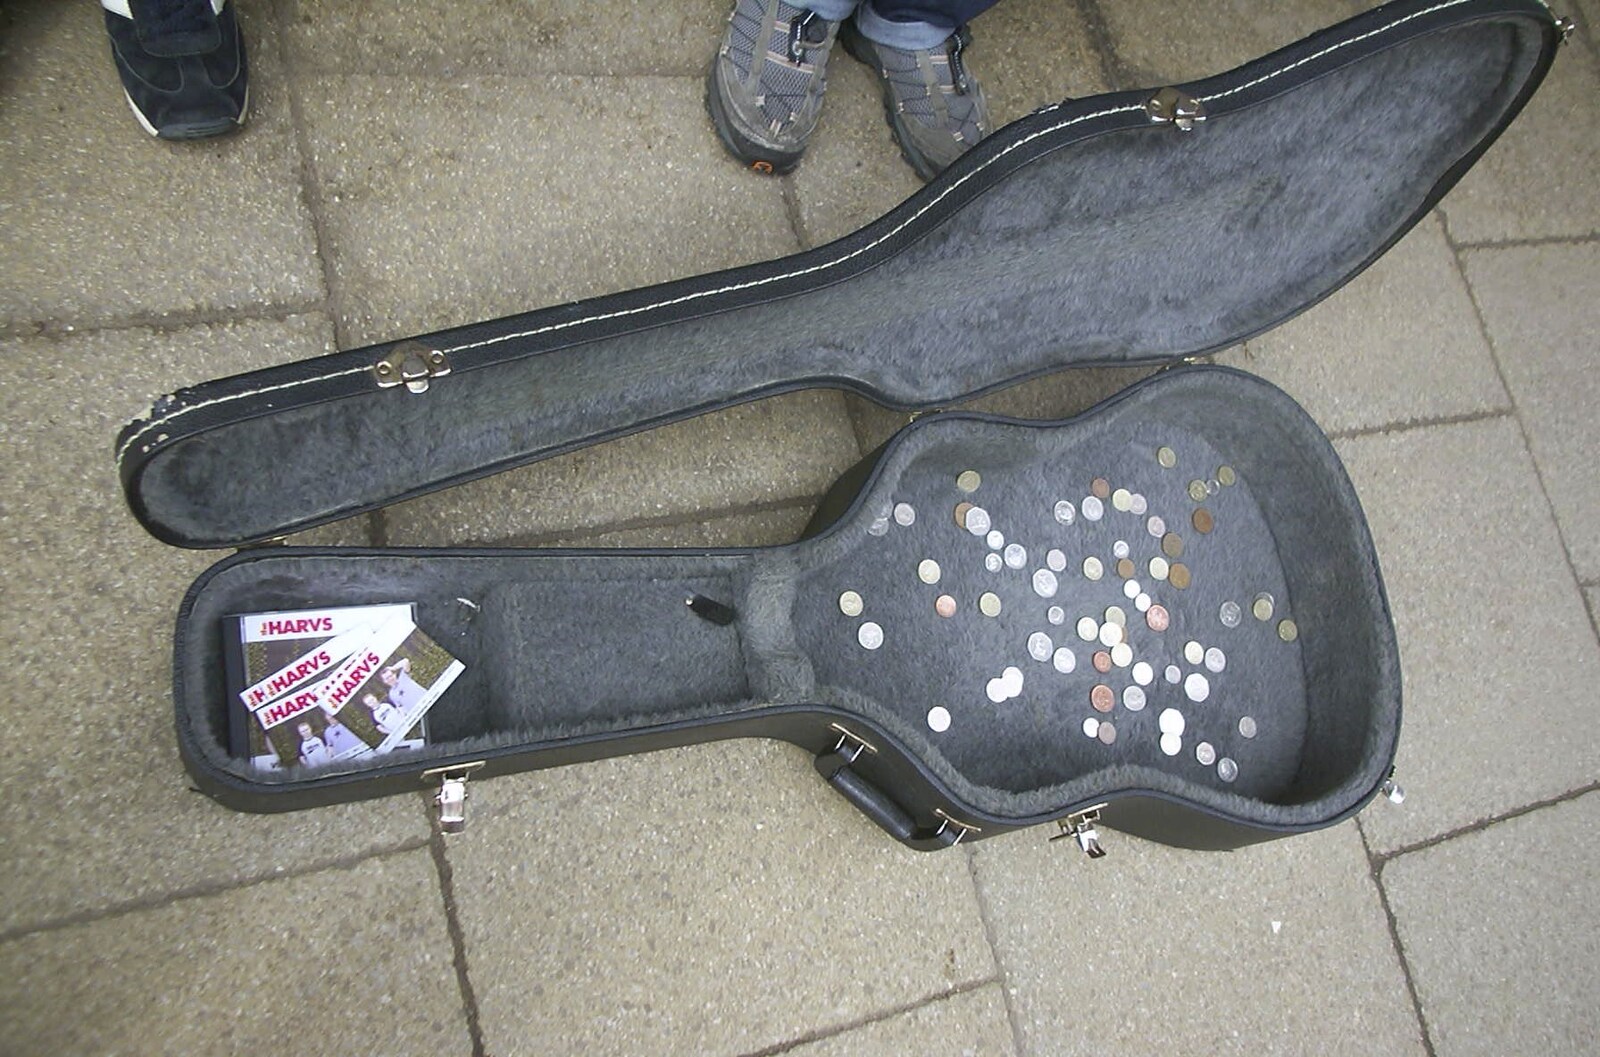 A Harvs guitar case from Moping in Southwold, Suffolk - 3rd April 2004